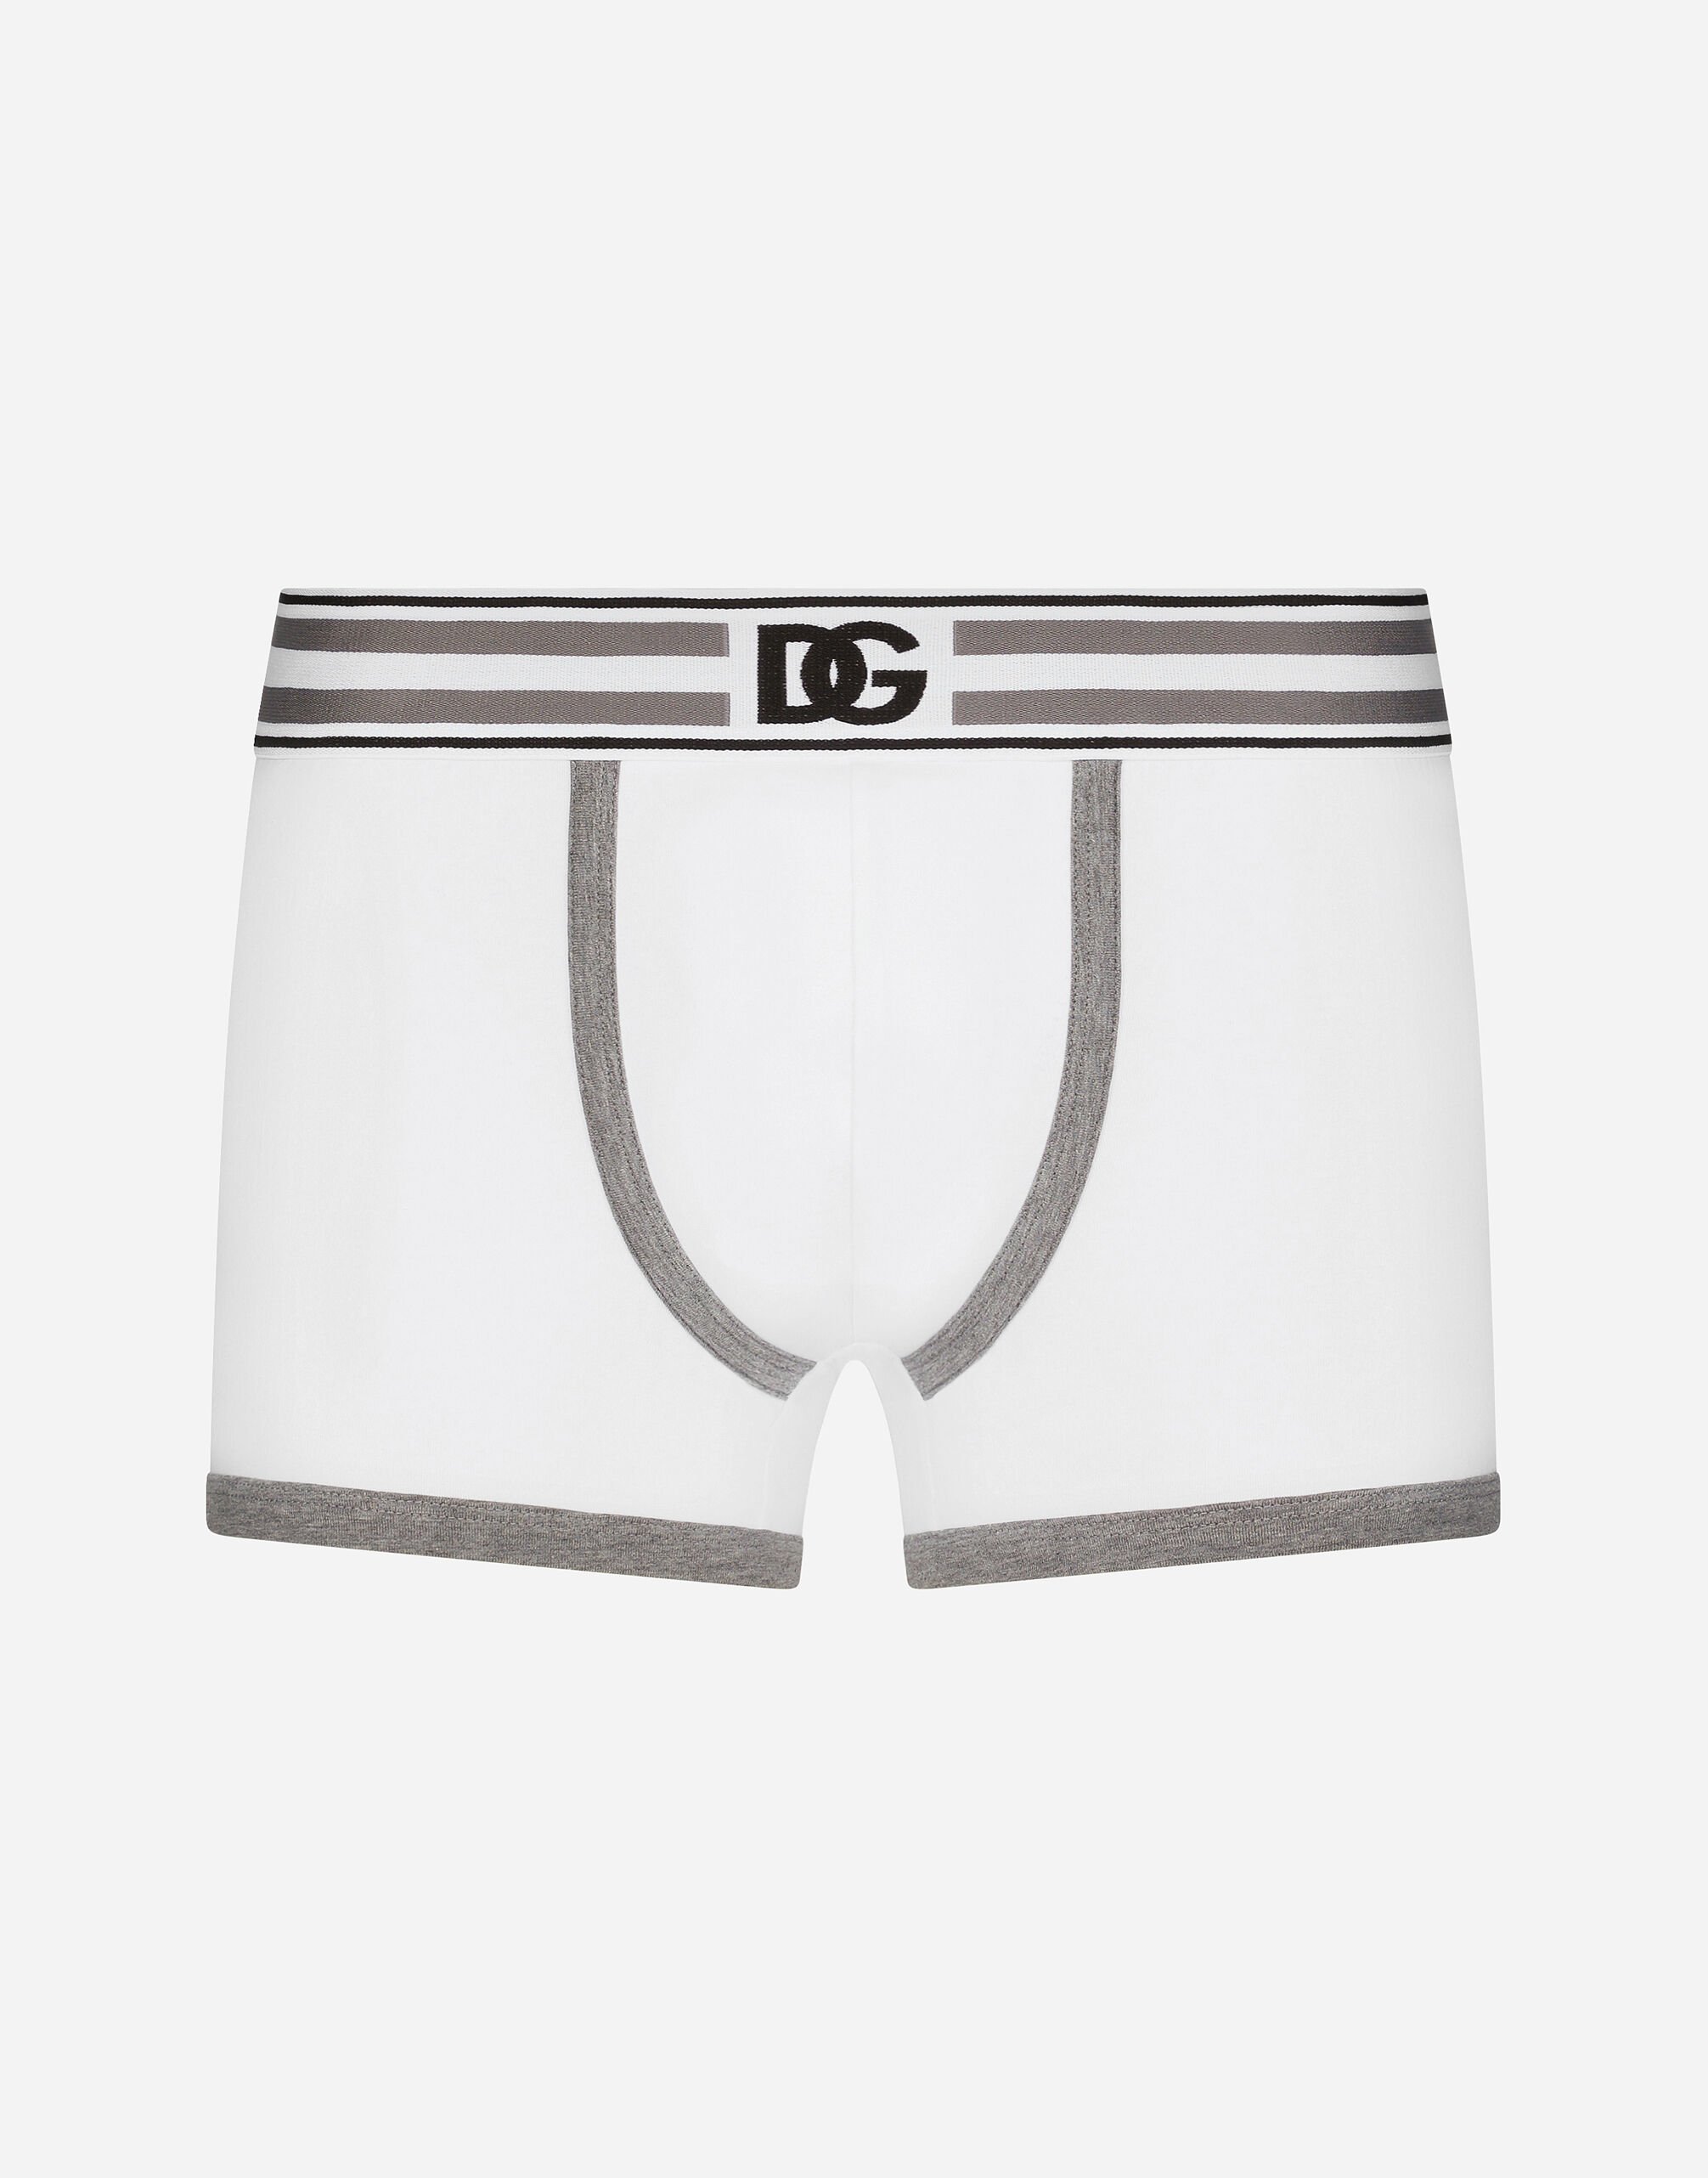 Dolce & Gabbana Regular-fit two-way stretch jersey boxers with DG logo Black VG446FVP187